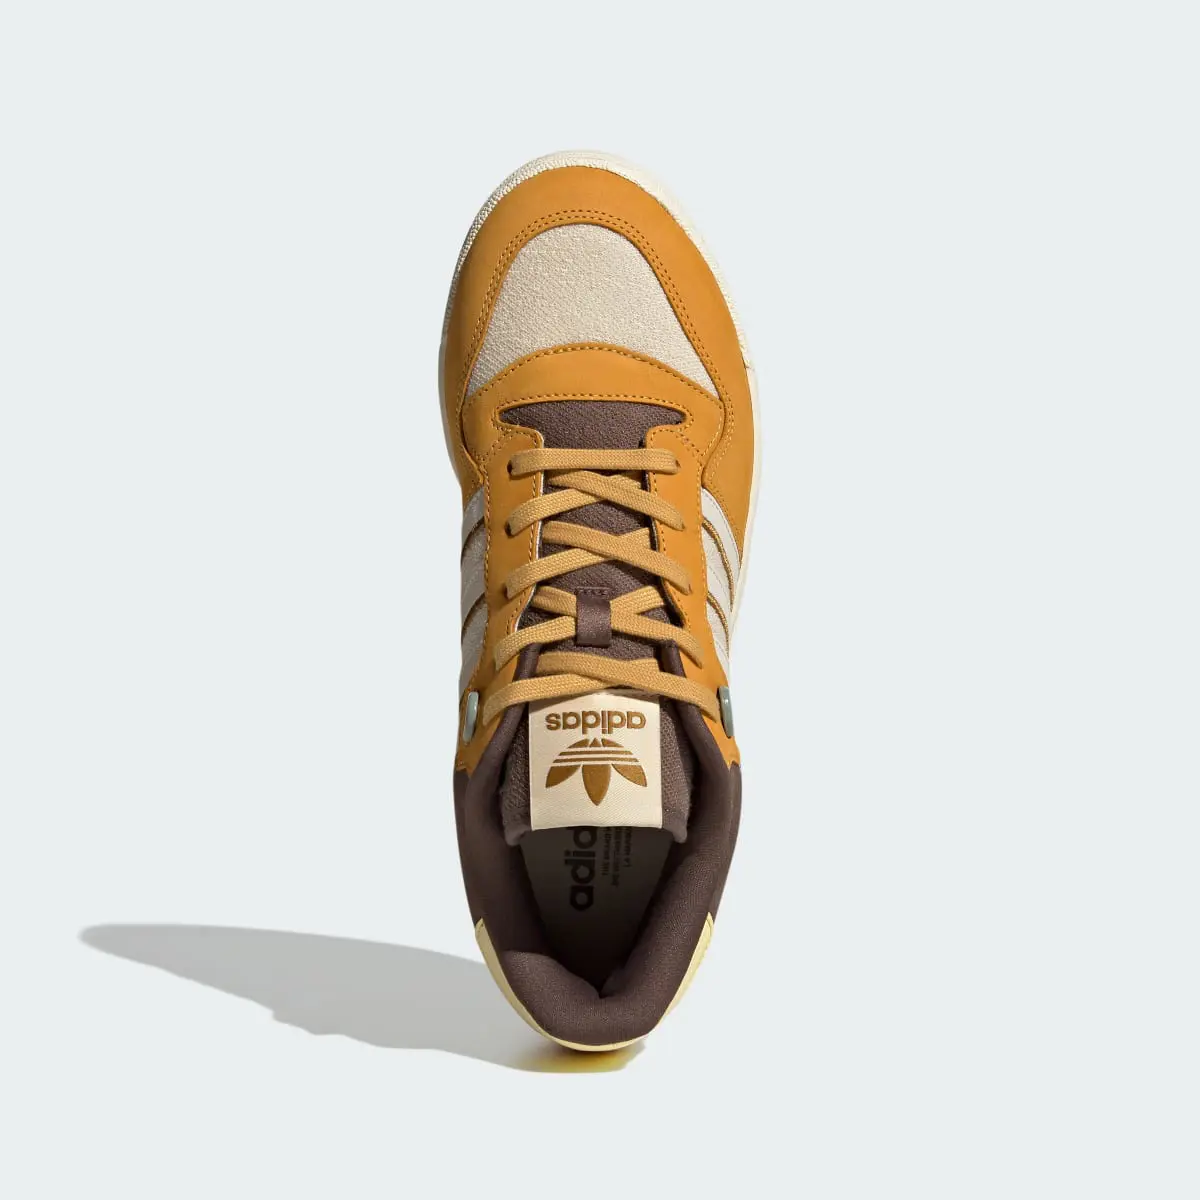 Adidas Rivalry Low 86 Basketball Shoes. 3